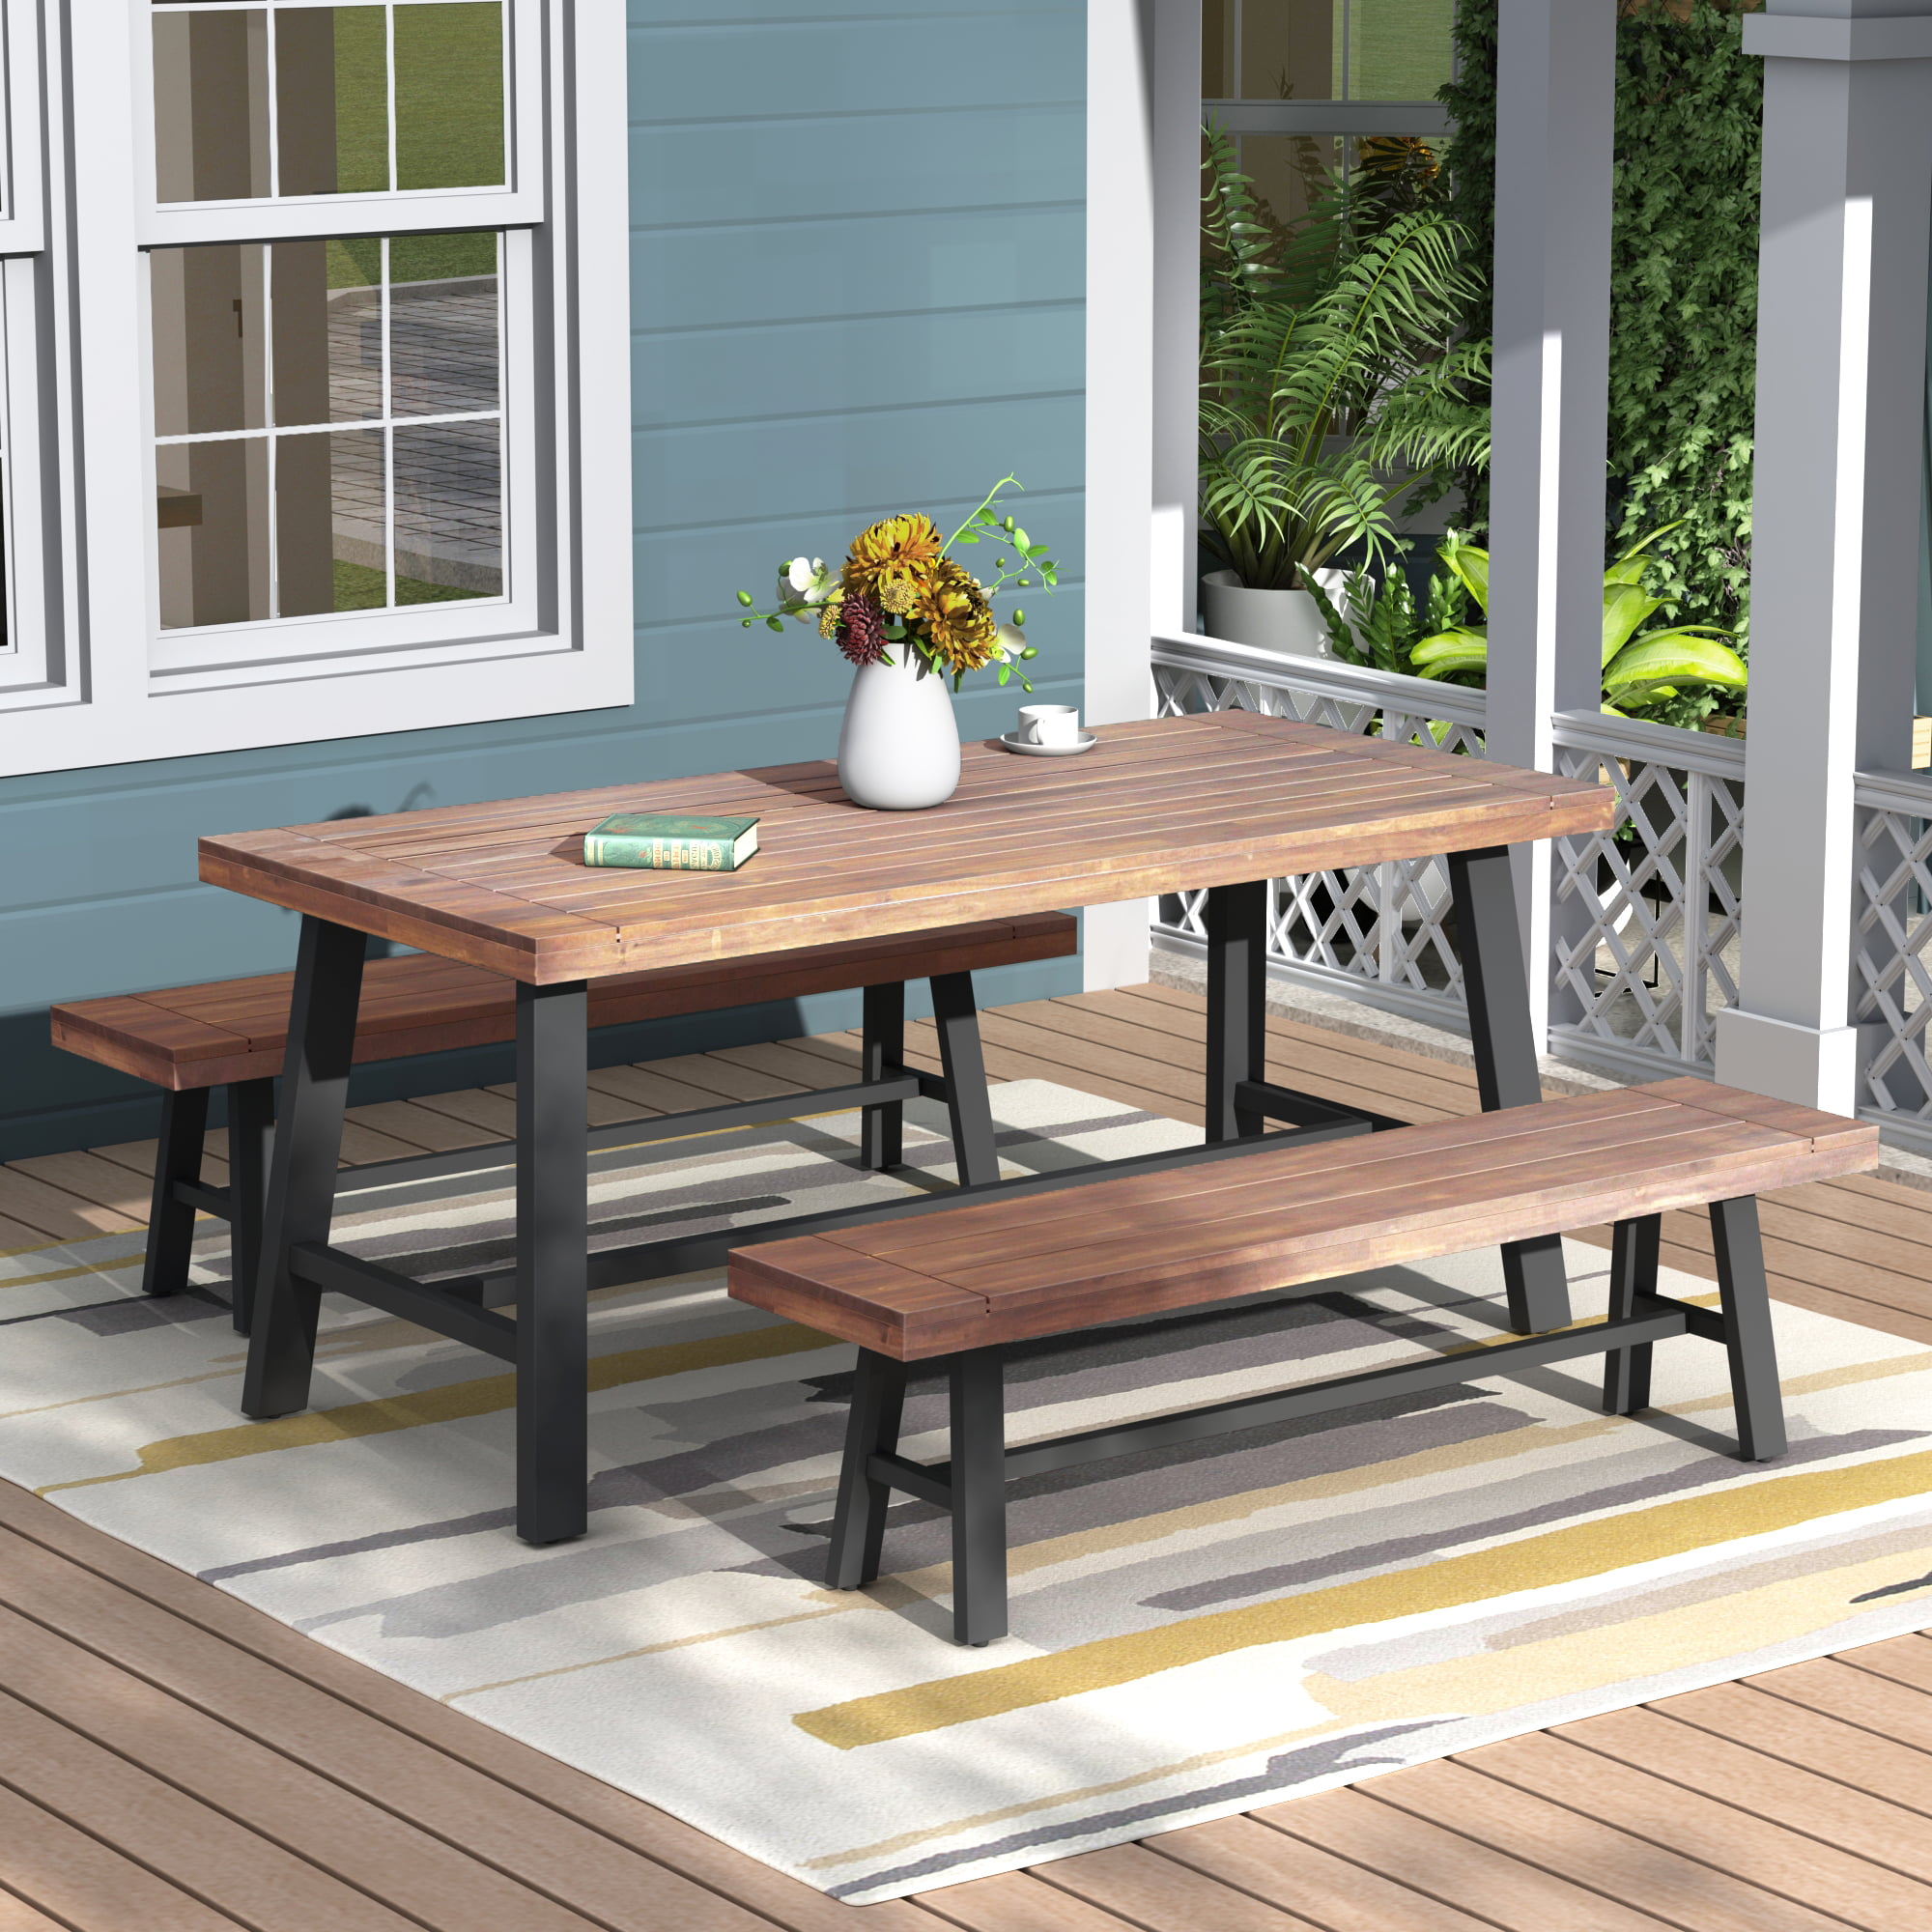 Outdoor Patio Furniture Dining Set, Solid Wood Outdoor Table and Bench ...